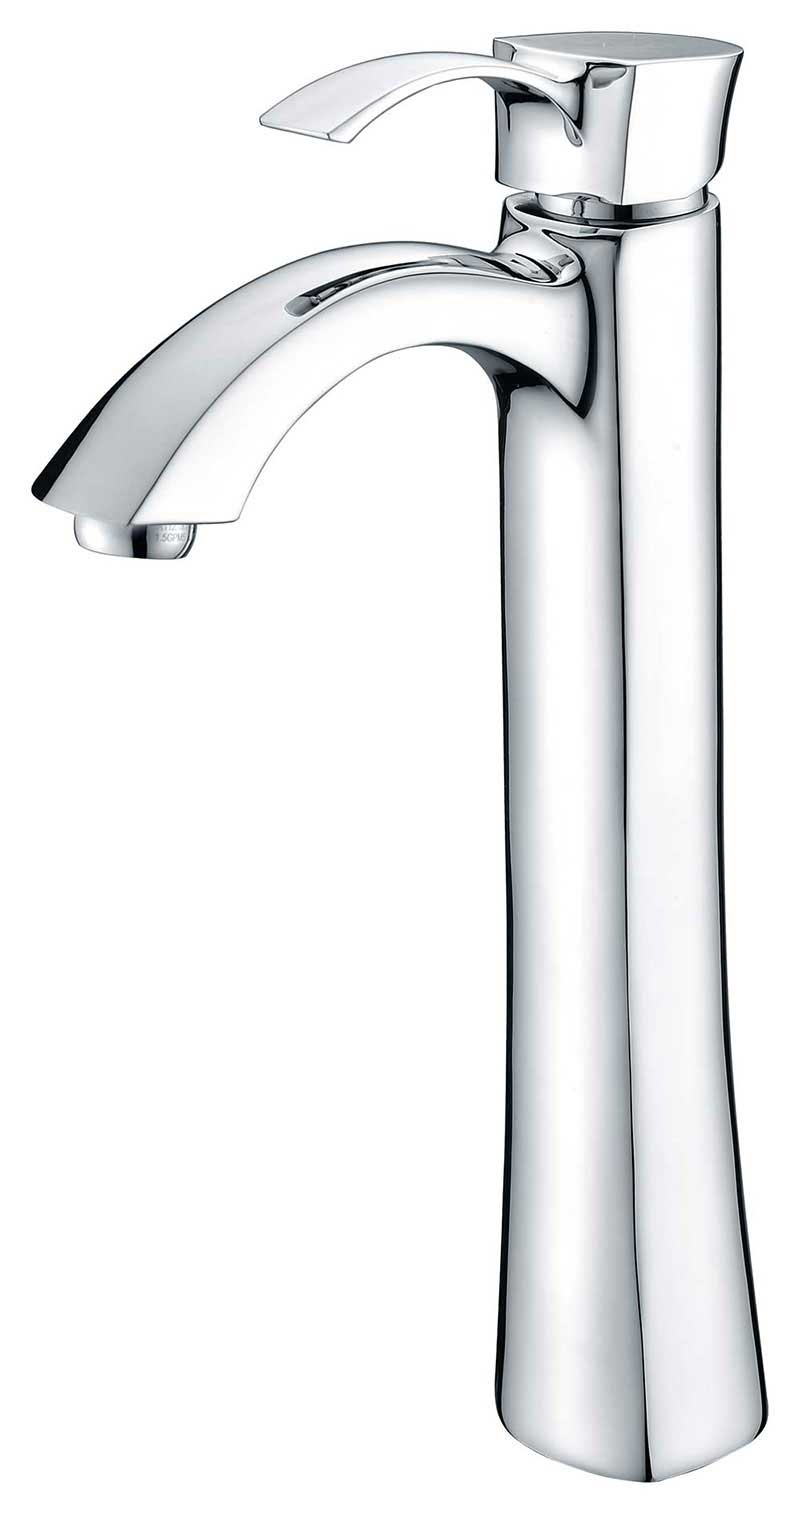 Anzzi Harmony Series Single Handle Vessel Sink Faucet in Polished Chrome